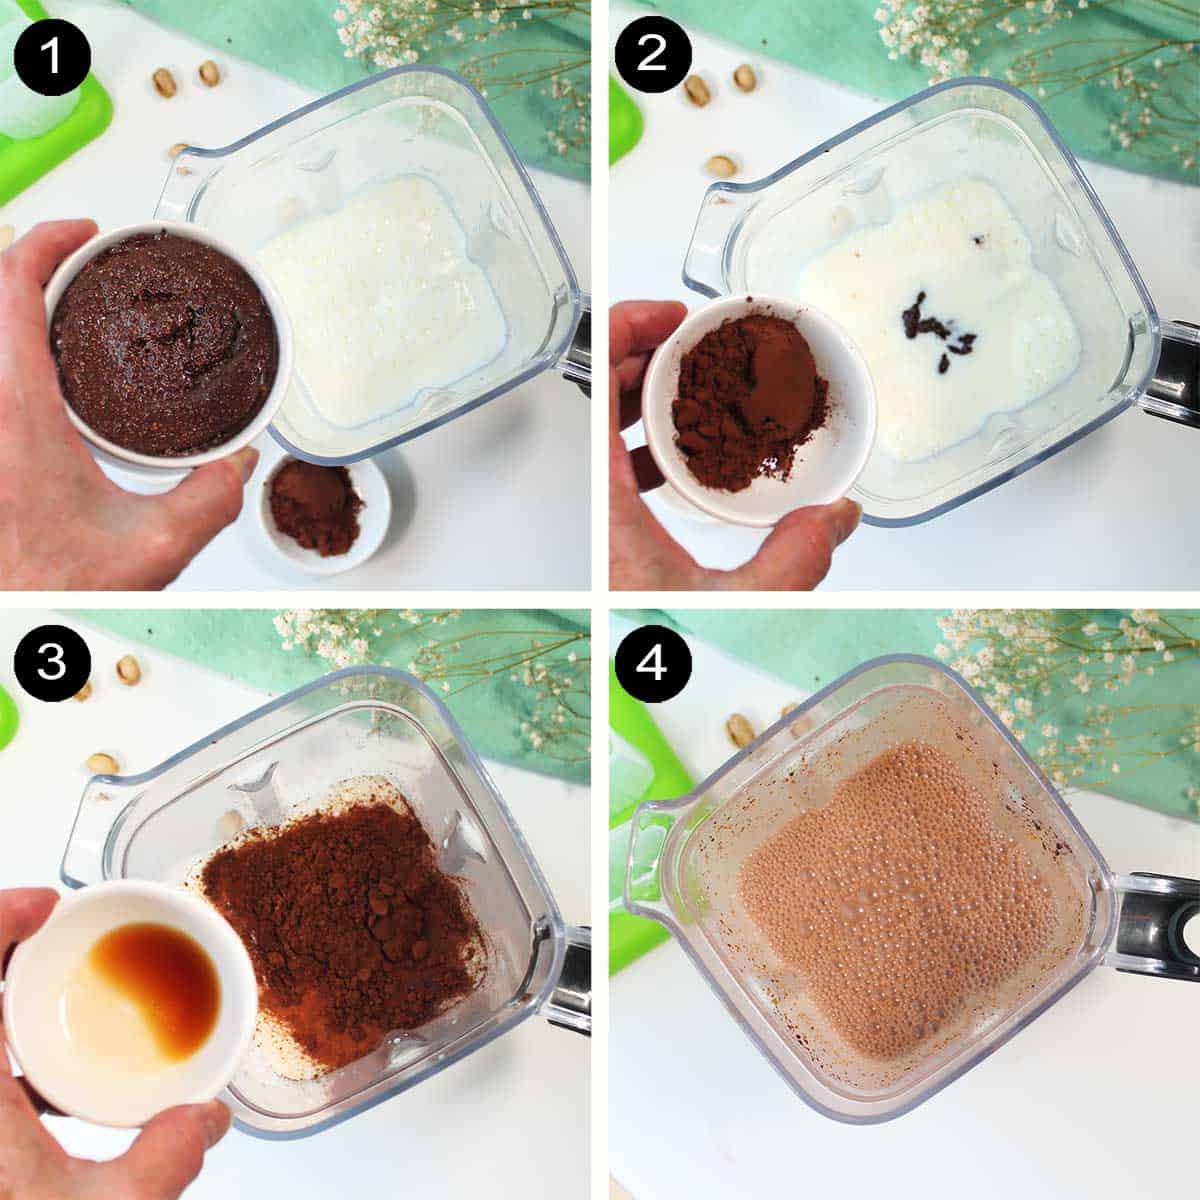 Steps to make chocolate popsicles.